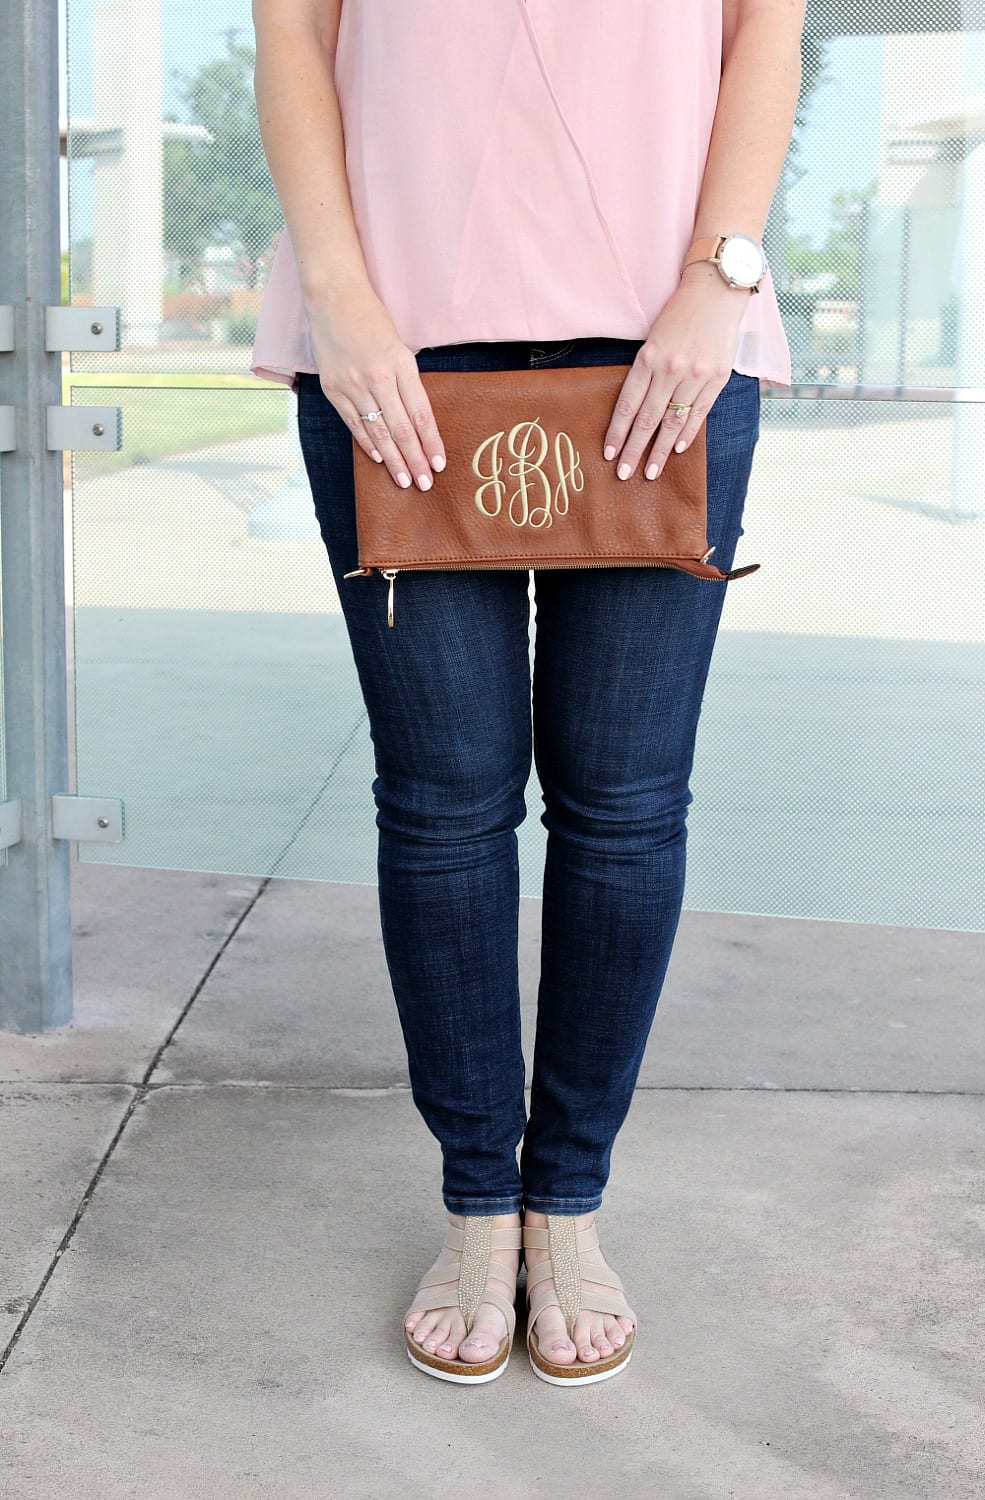 Spring Outfit Ideas - pair a pink hi-low hem tank with denim and sandals.